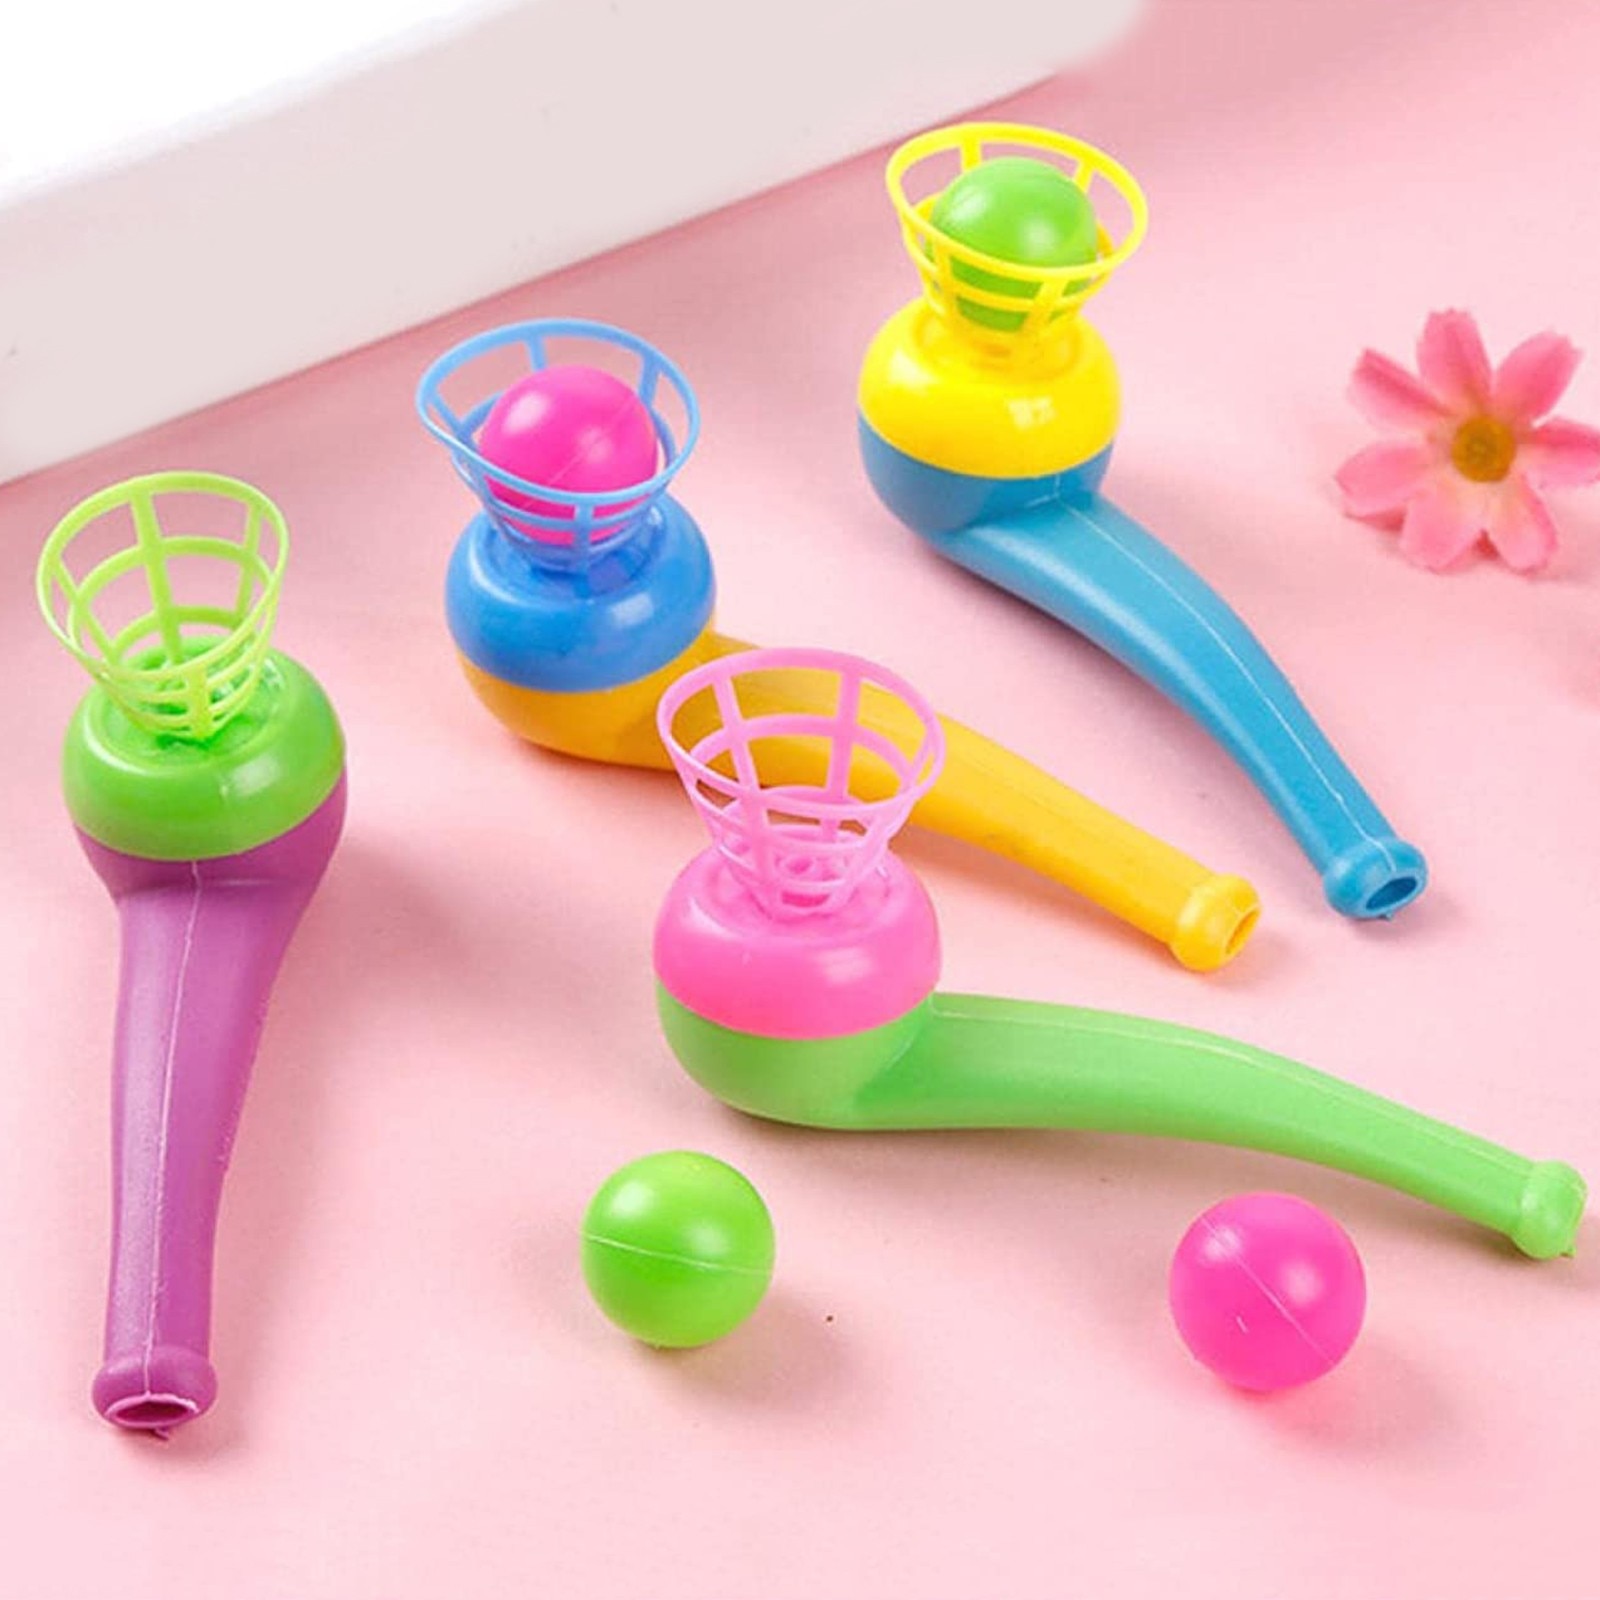 2021 Baby Toys Random Color Suspended Blow Pipe Blow Ball Rod Board Game For Children Balance Training Floating Blowing Ball Toy